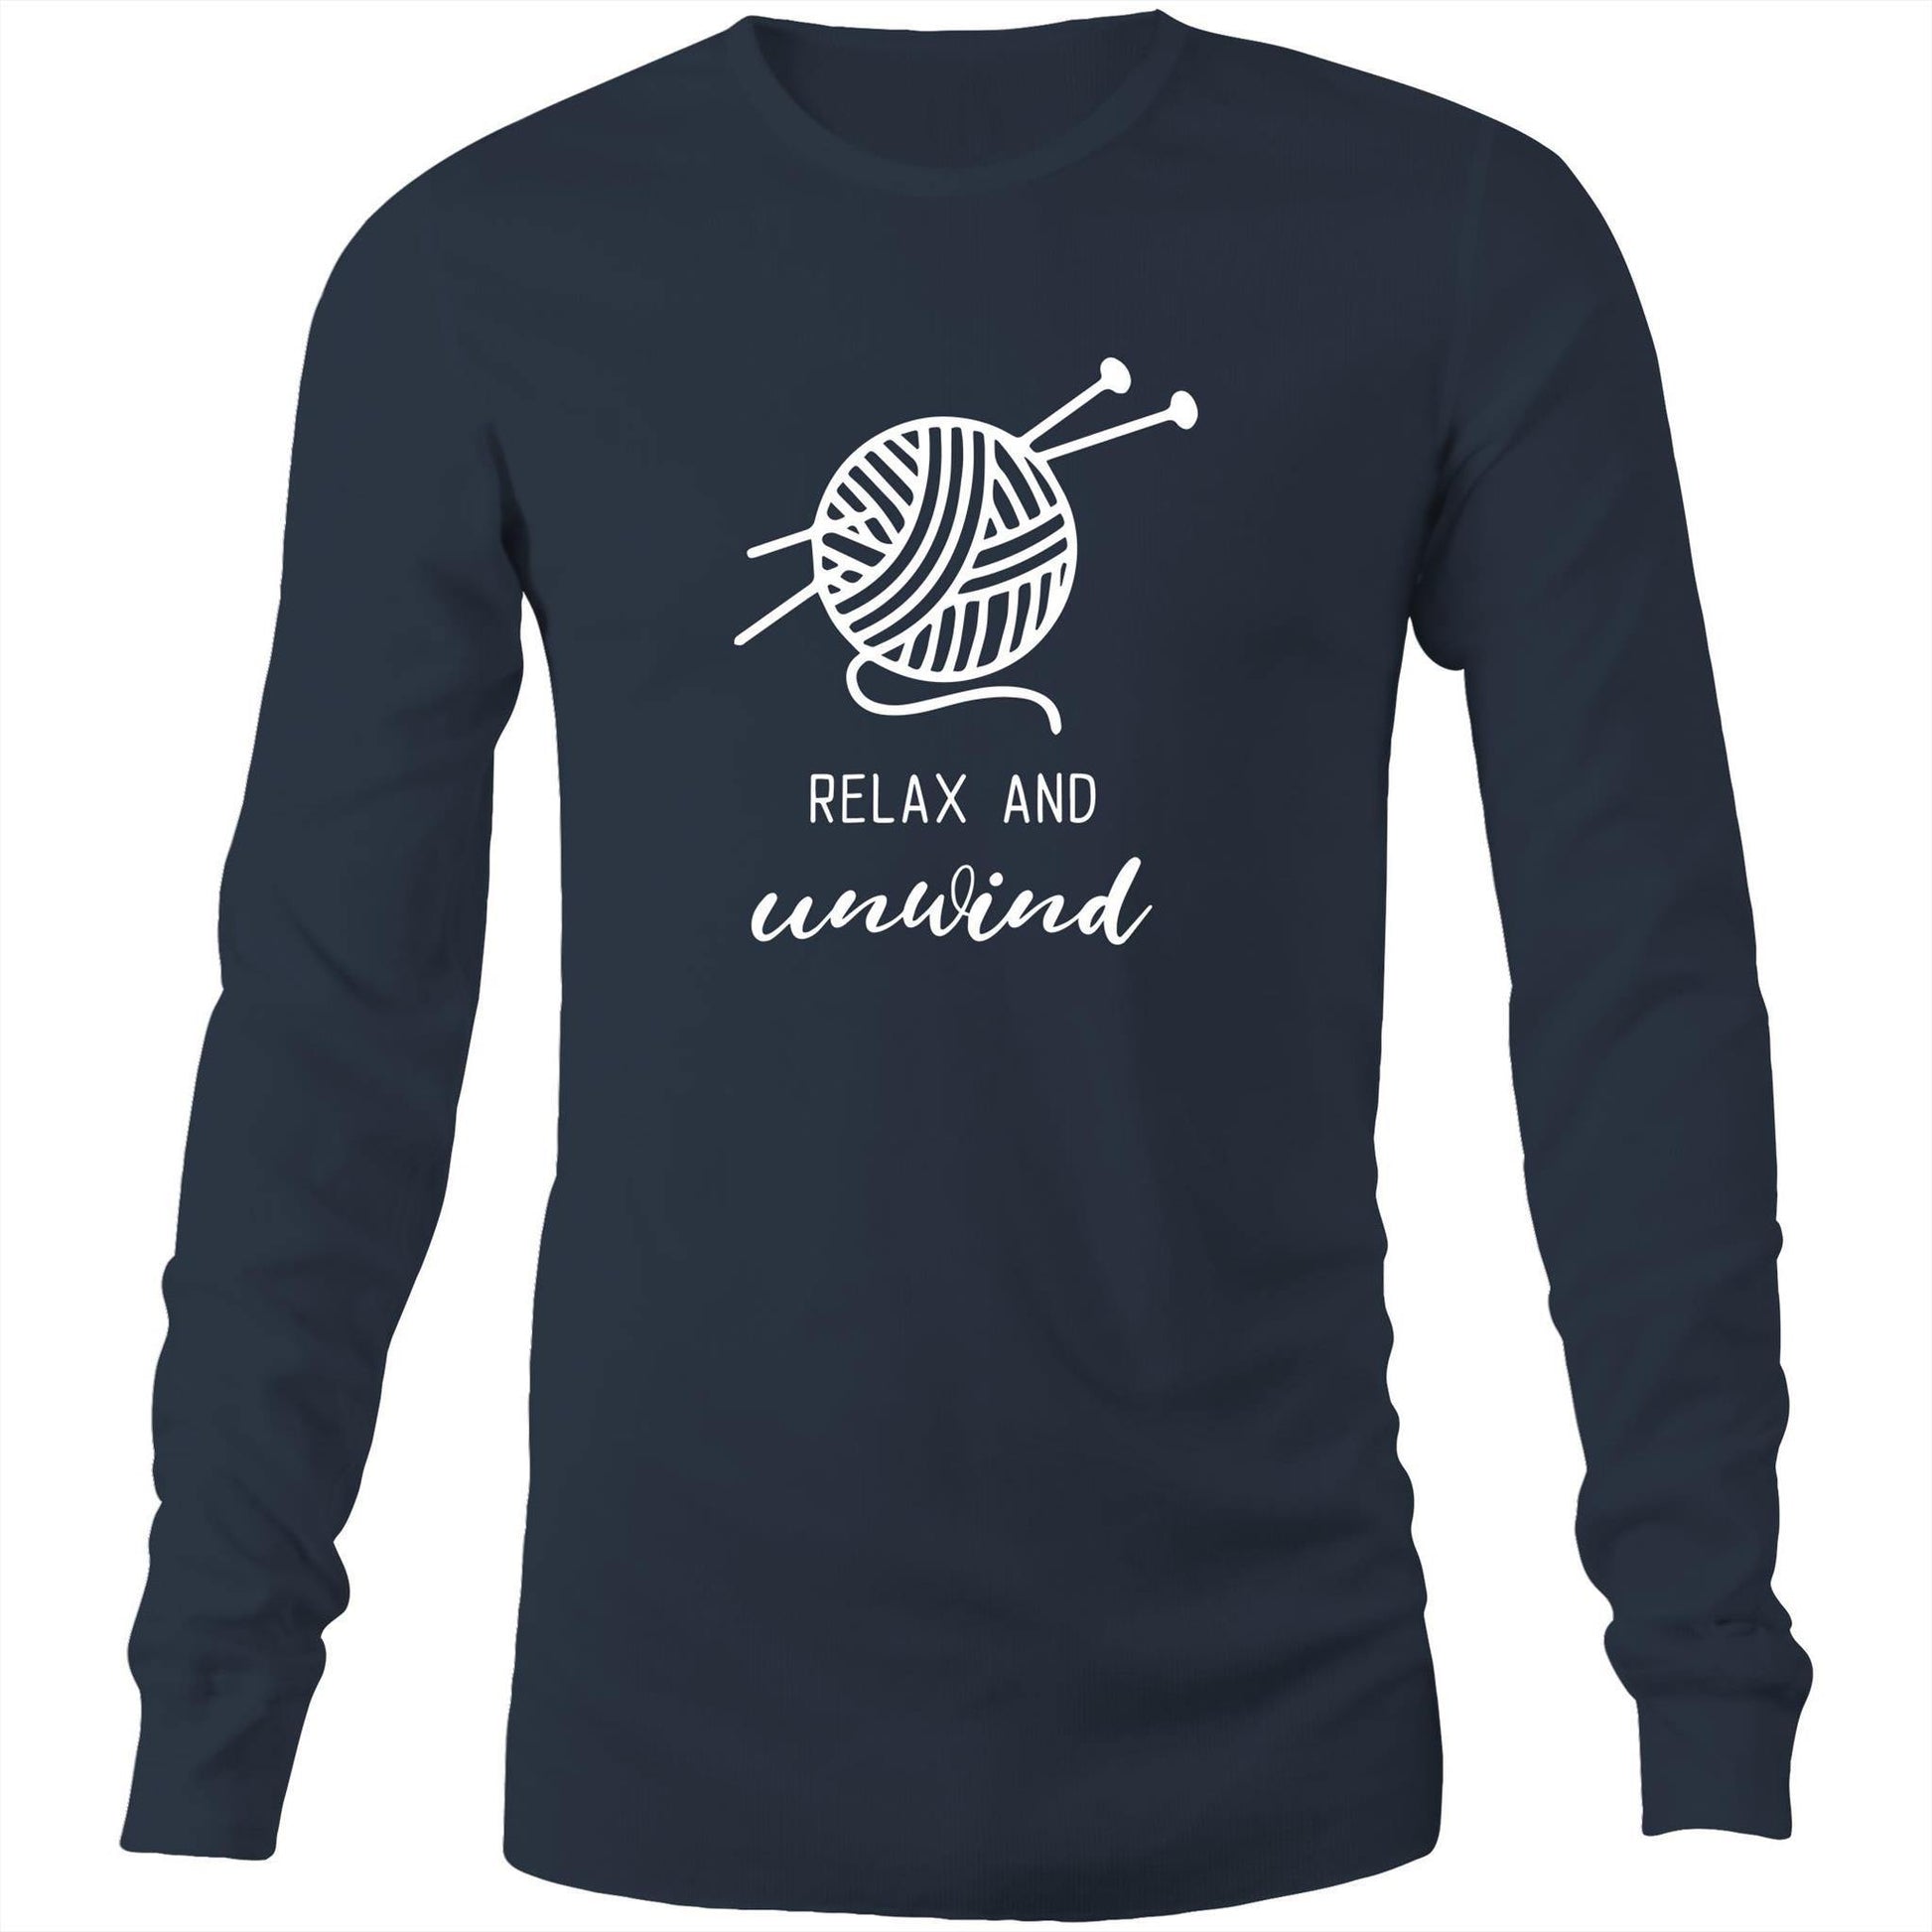 Relax And Unwind - Long Sleeve T-Shirt Navy Unisex Long Sleeve T-shirt Mens Womens